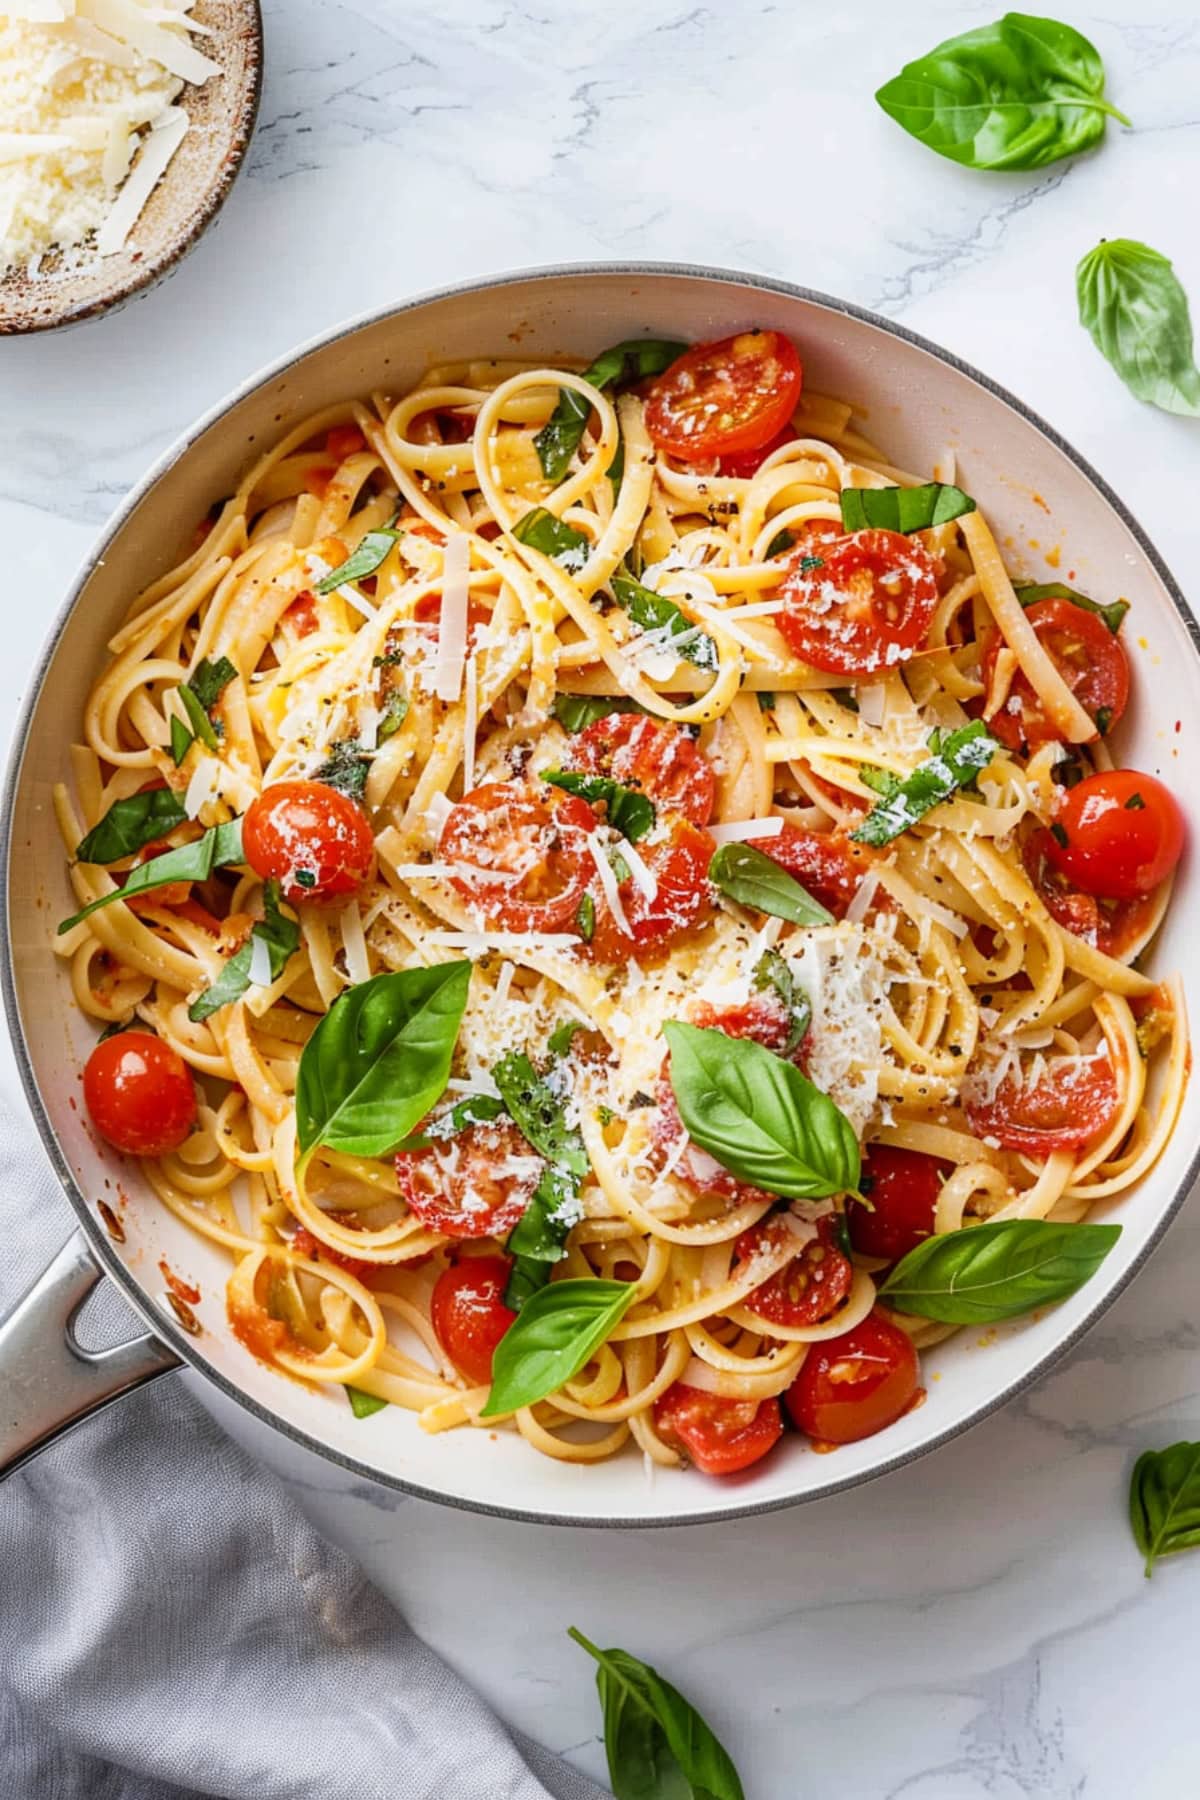 Cherry tomato and linguine pasta with fresh basil leaves in a saucepan.